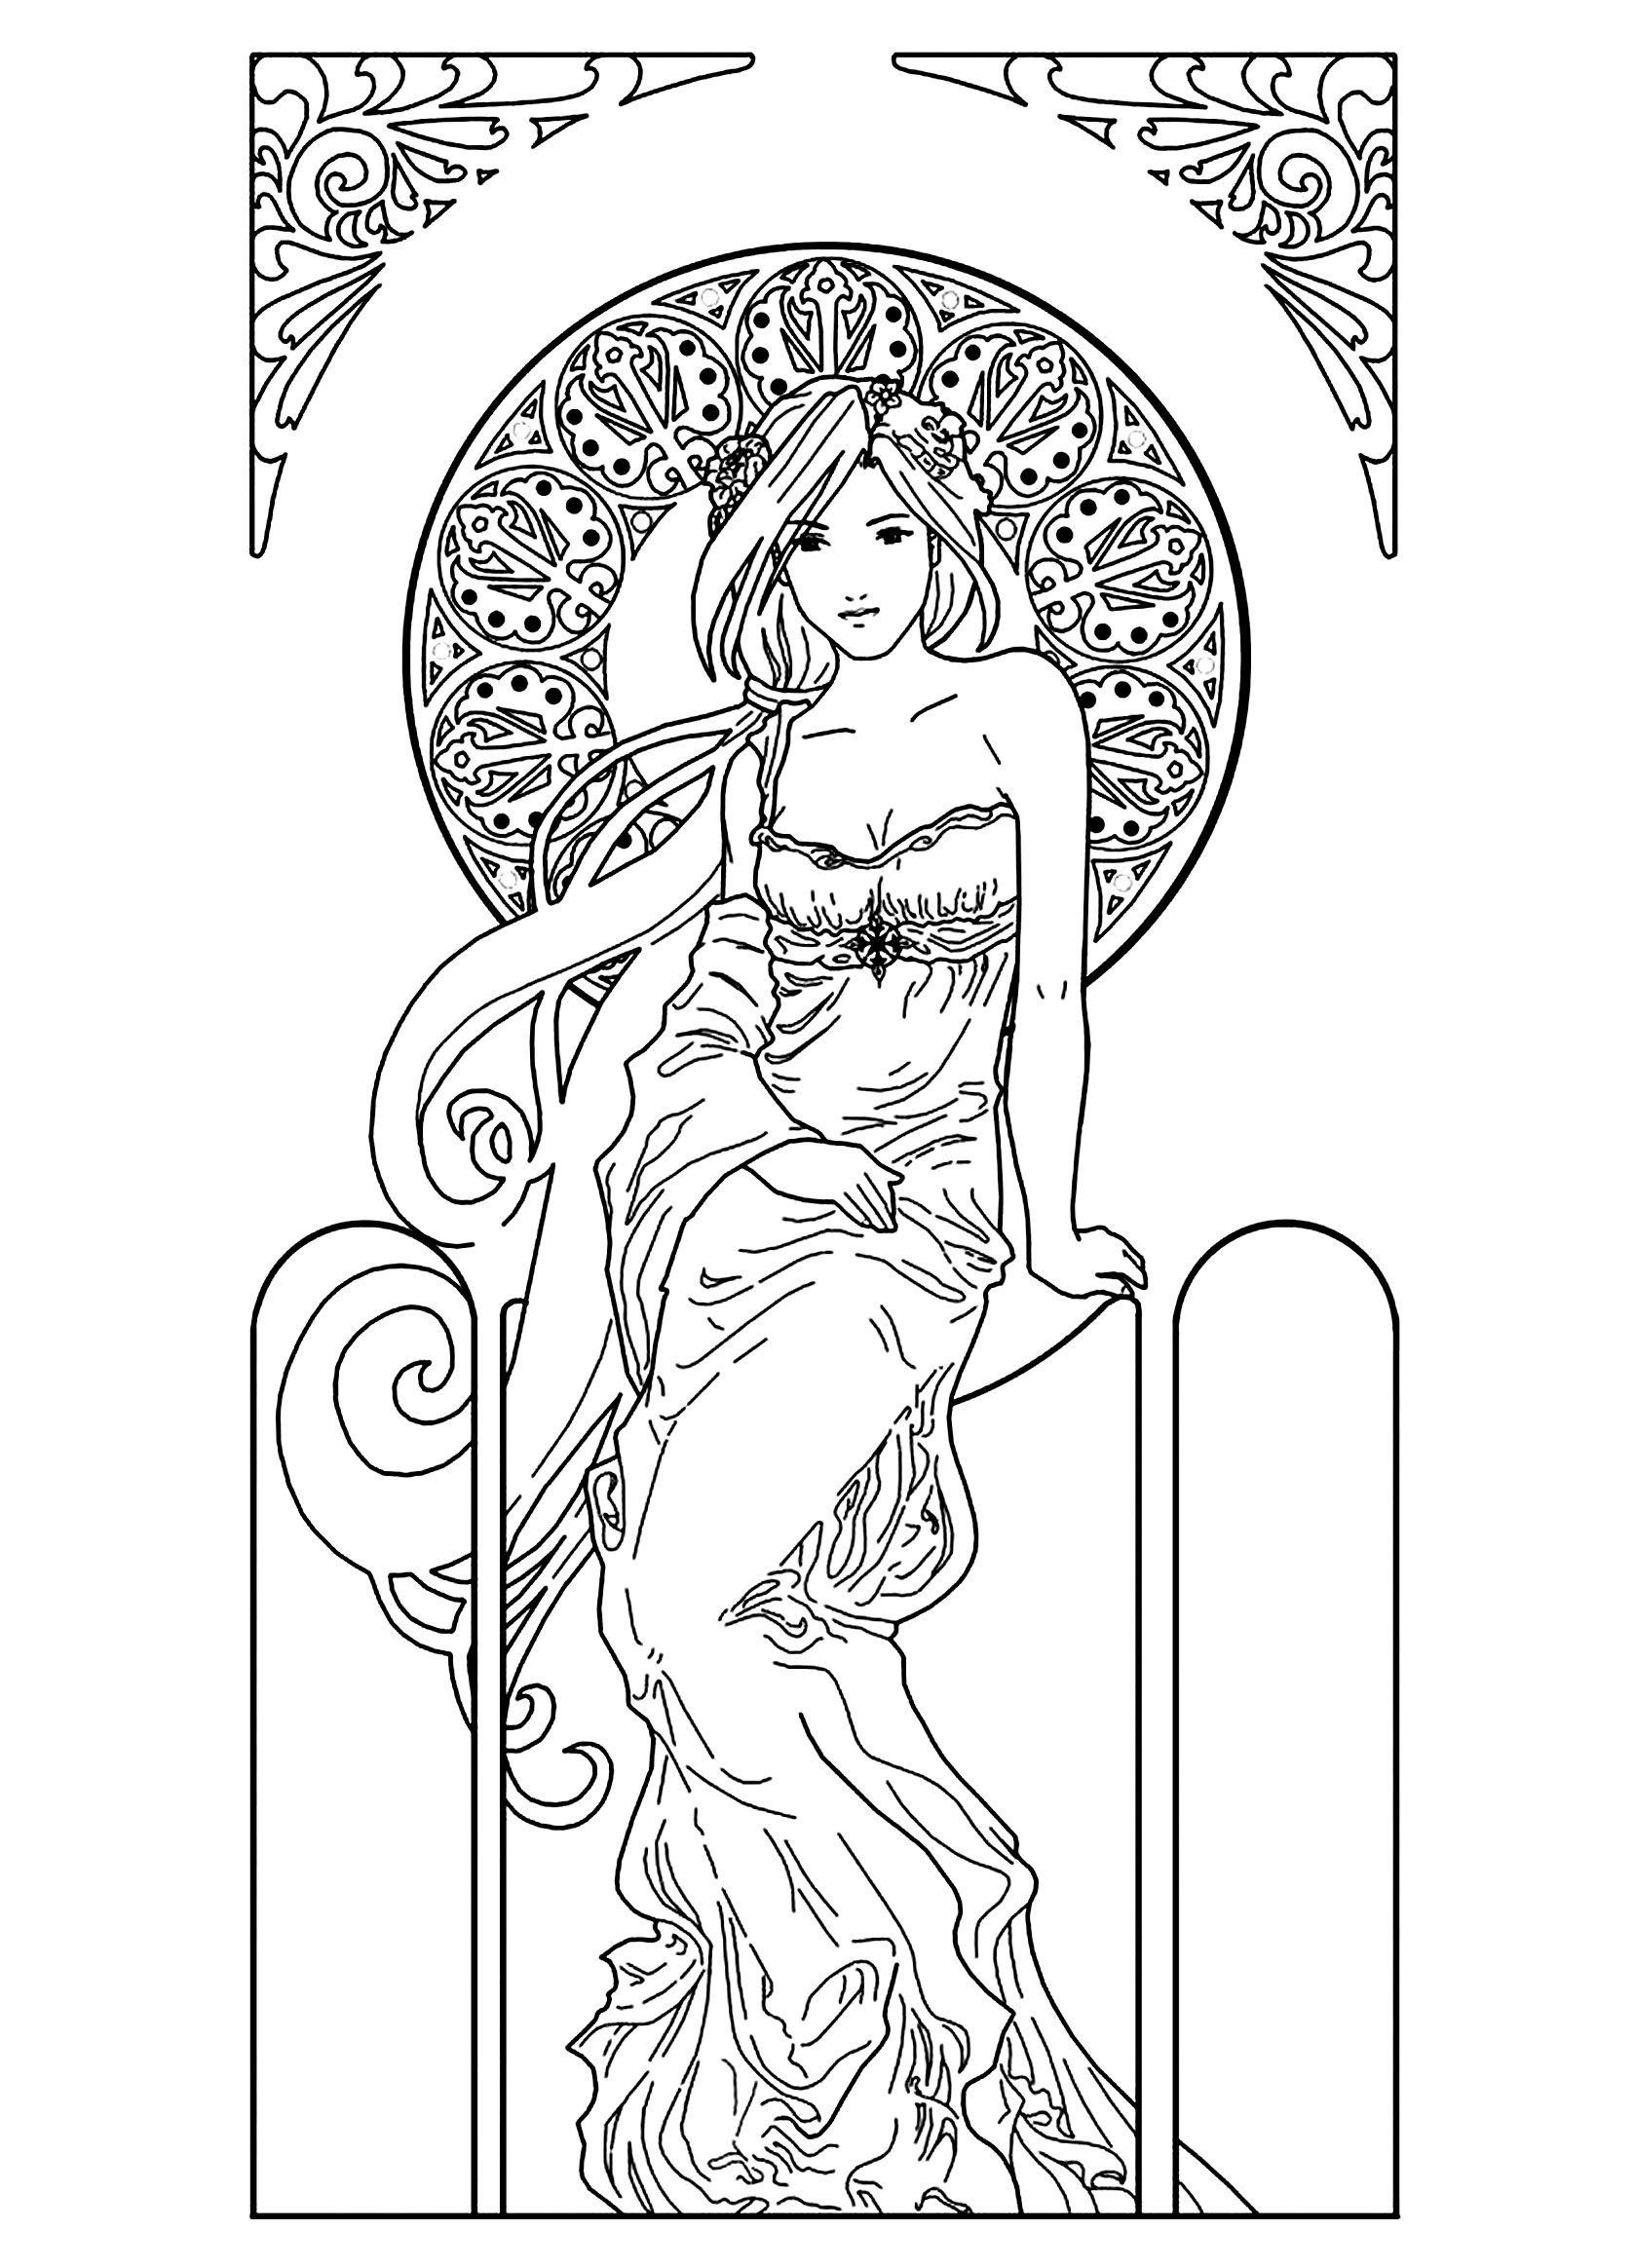 Drawing of a woman, Art nouveau style. Simple and elegant